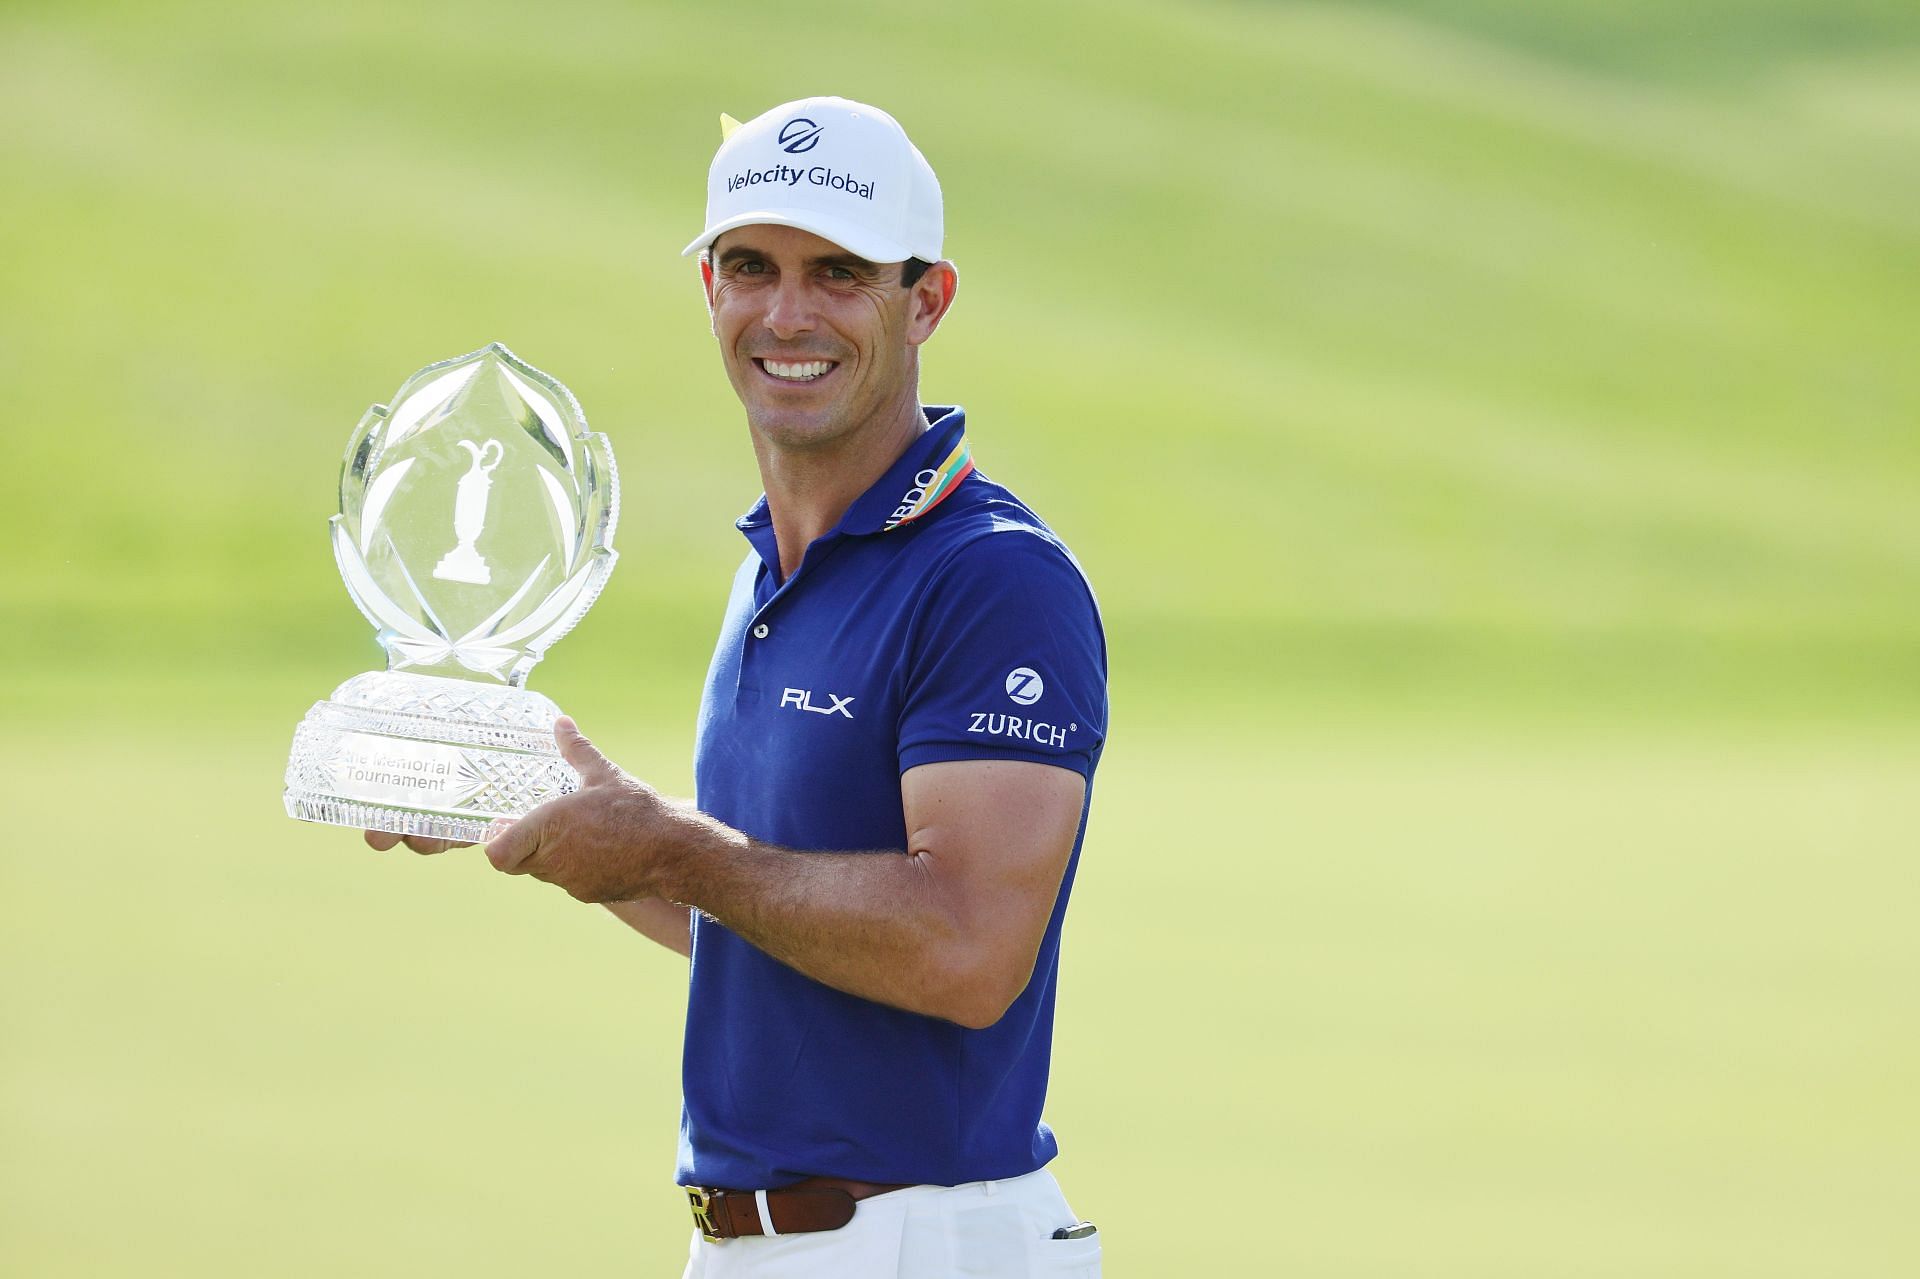 Billy Horschel is the defending champion at the Memorial Tournament